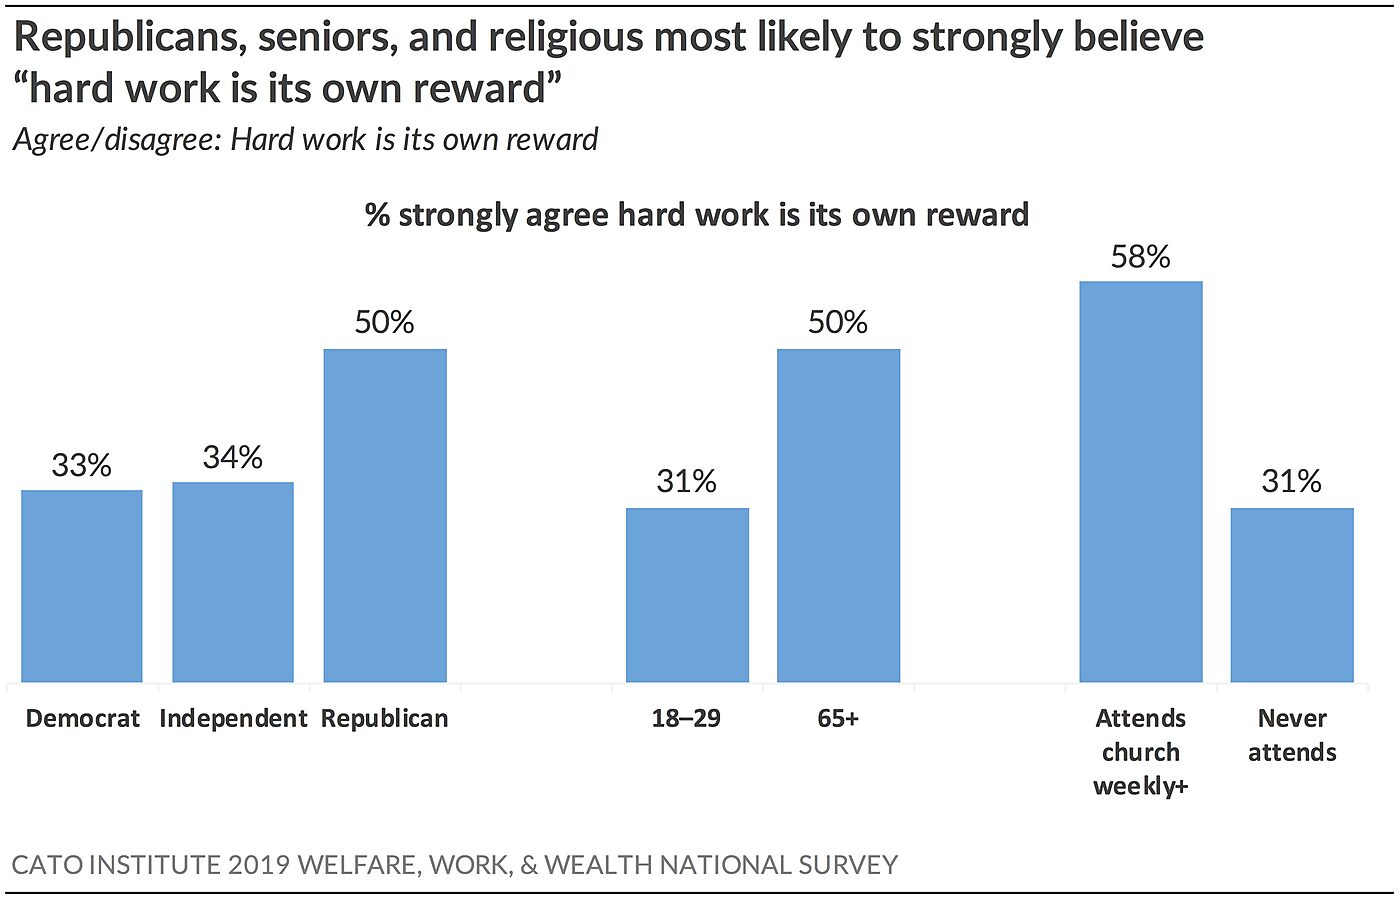 Republicans, seniors, and religious most likely to strongly believe "hard work is its own reward"